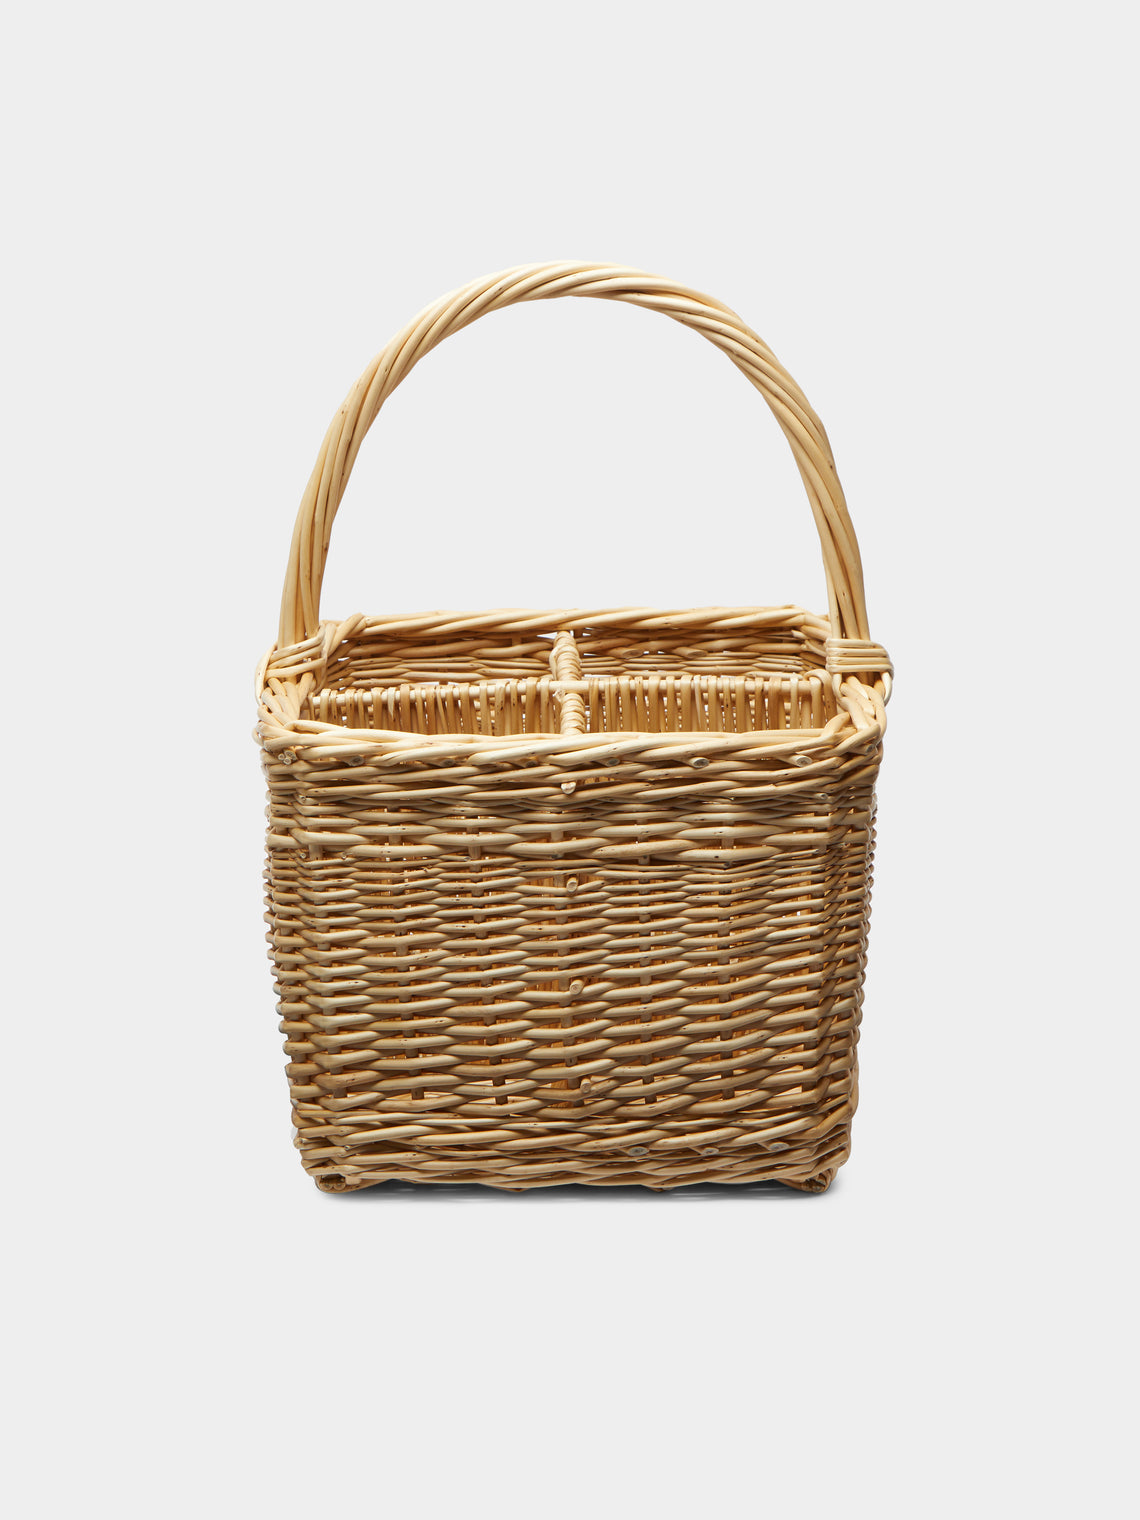 Sussex Willow Baskets - Handwoven Willow Bottle Carrier -  - ABASK